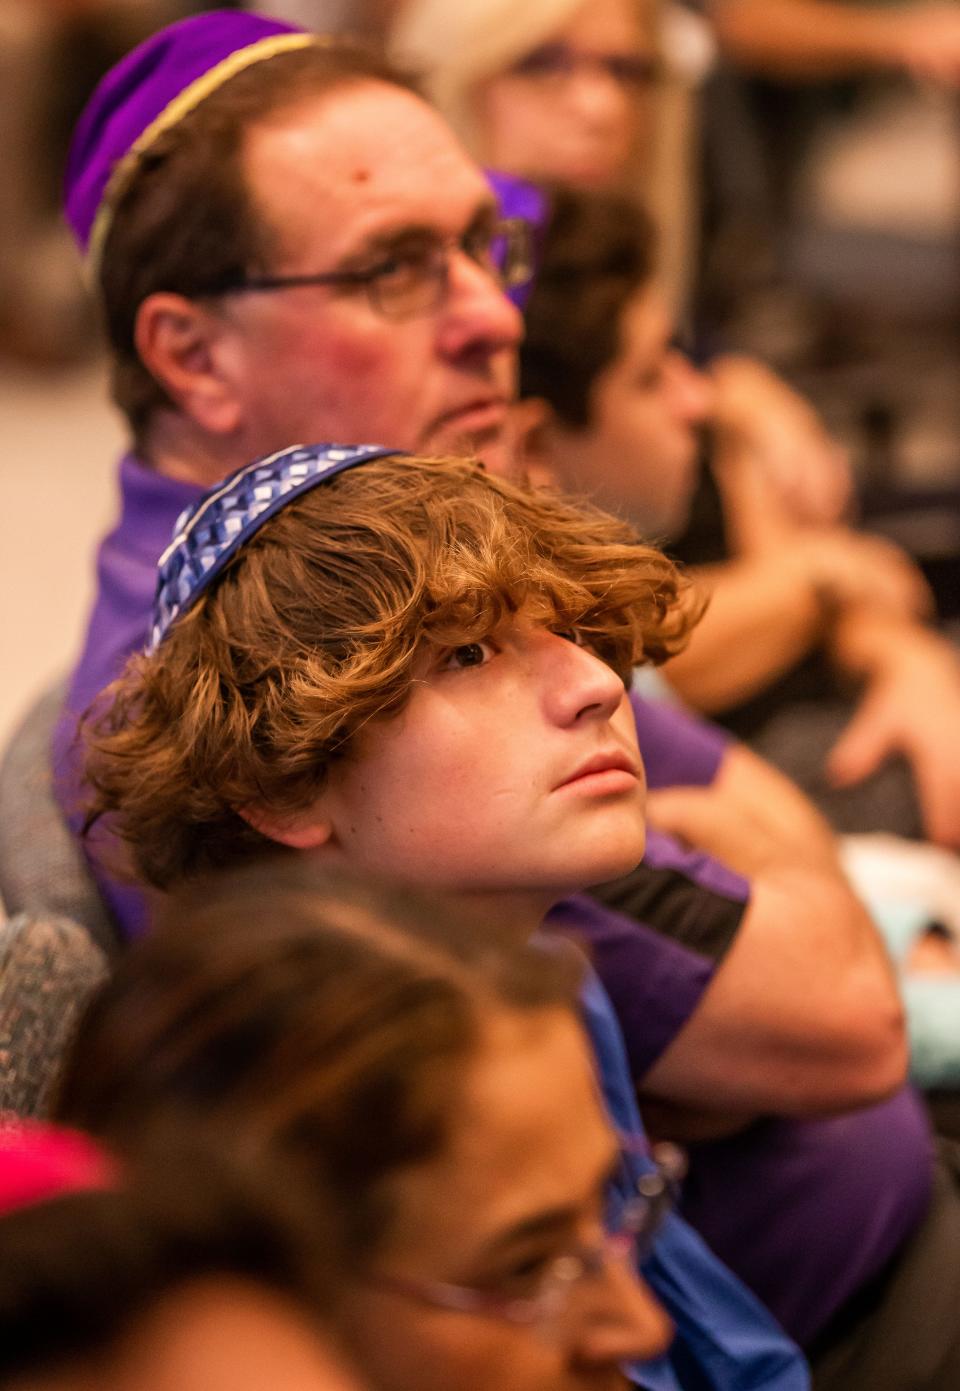 Both young and old took part in the Standing With Israel Vigil led by Rabbi Erin Boxt on Wednesday at Temple Beth Shalom, located at the Ocala Tree of Life Sanctuary.